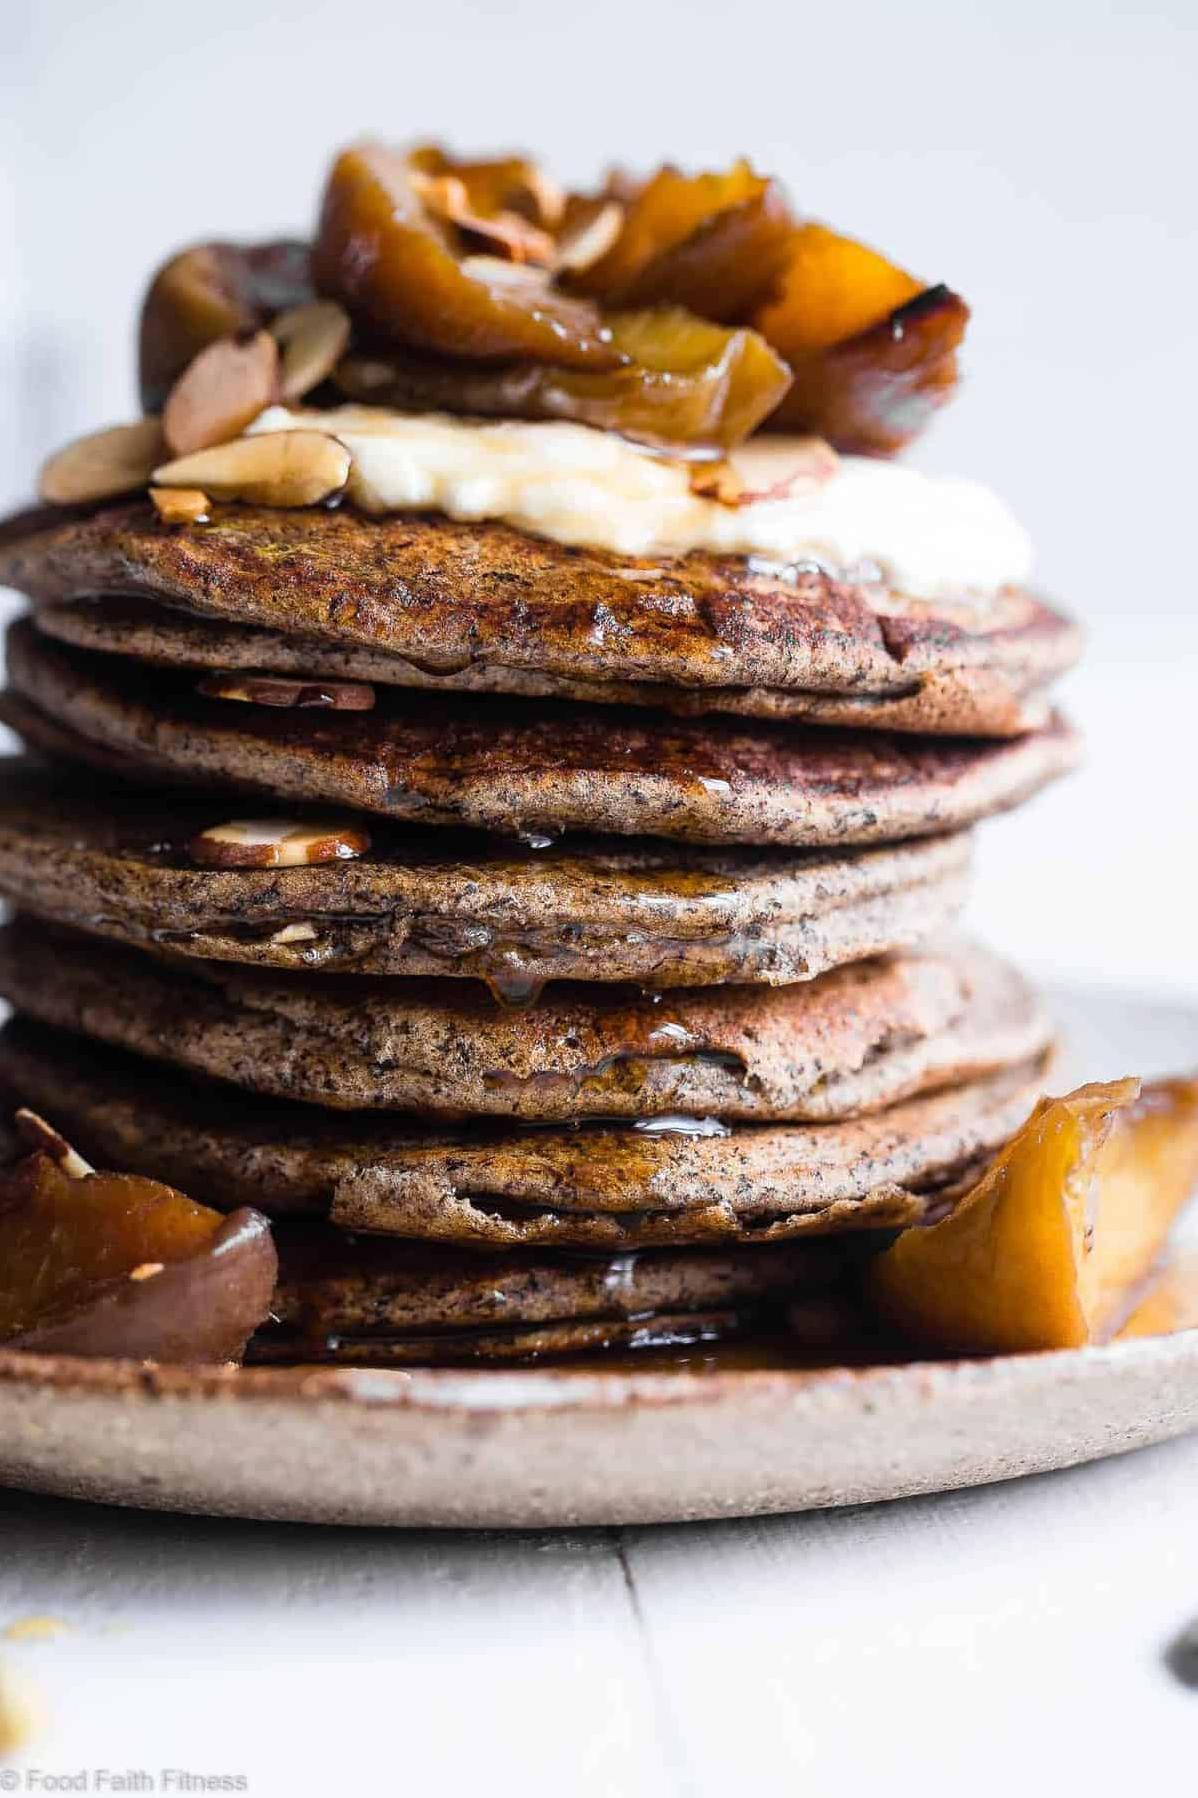  Get ready to fuel your body with these gluten-free superfood pancakes.